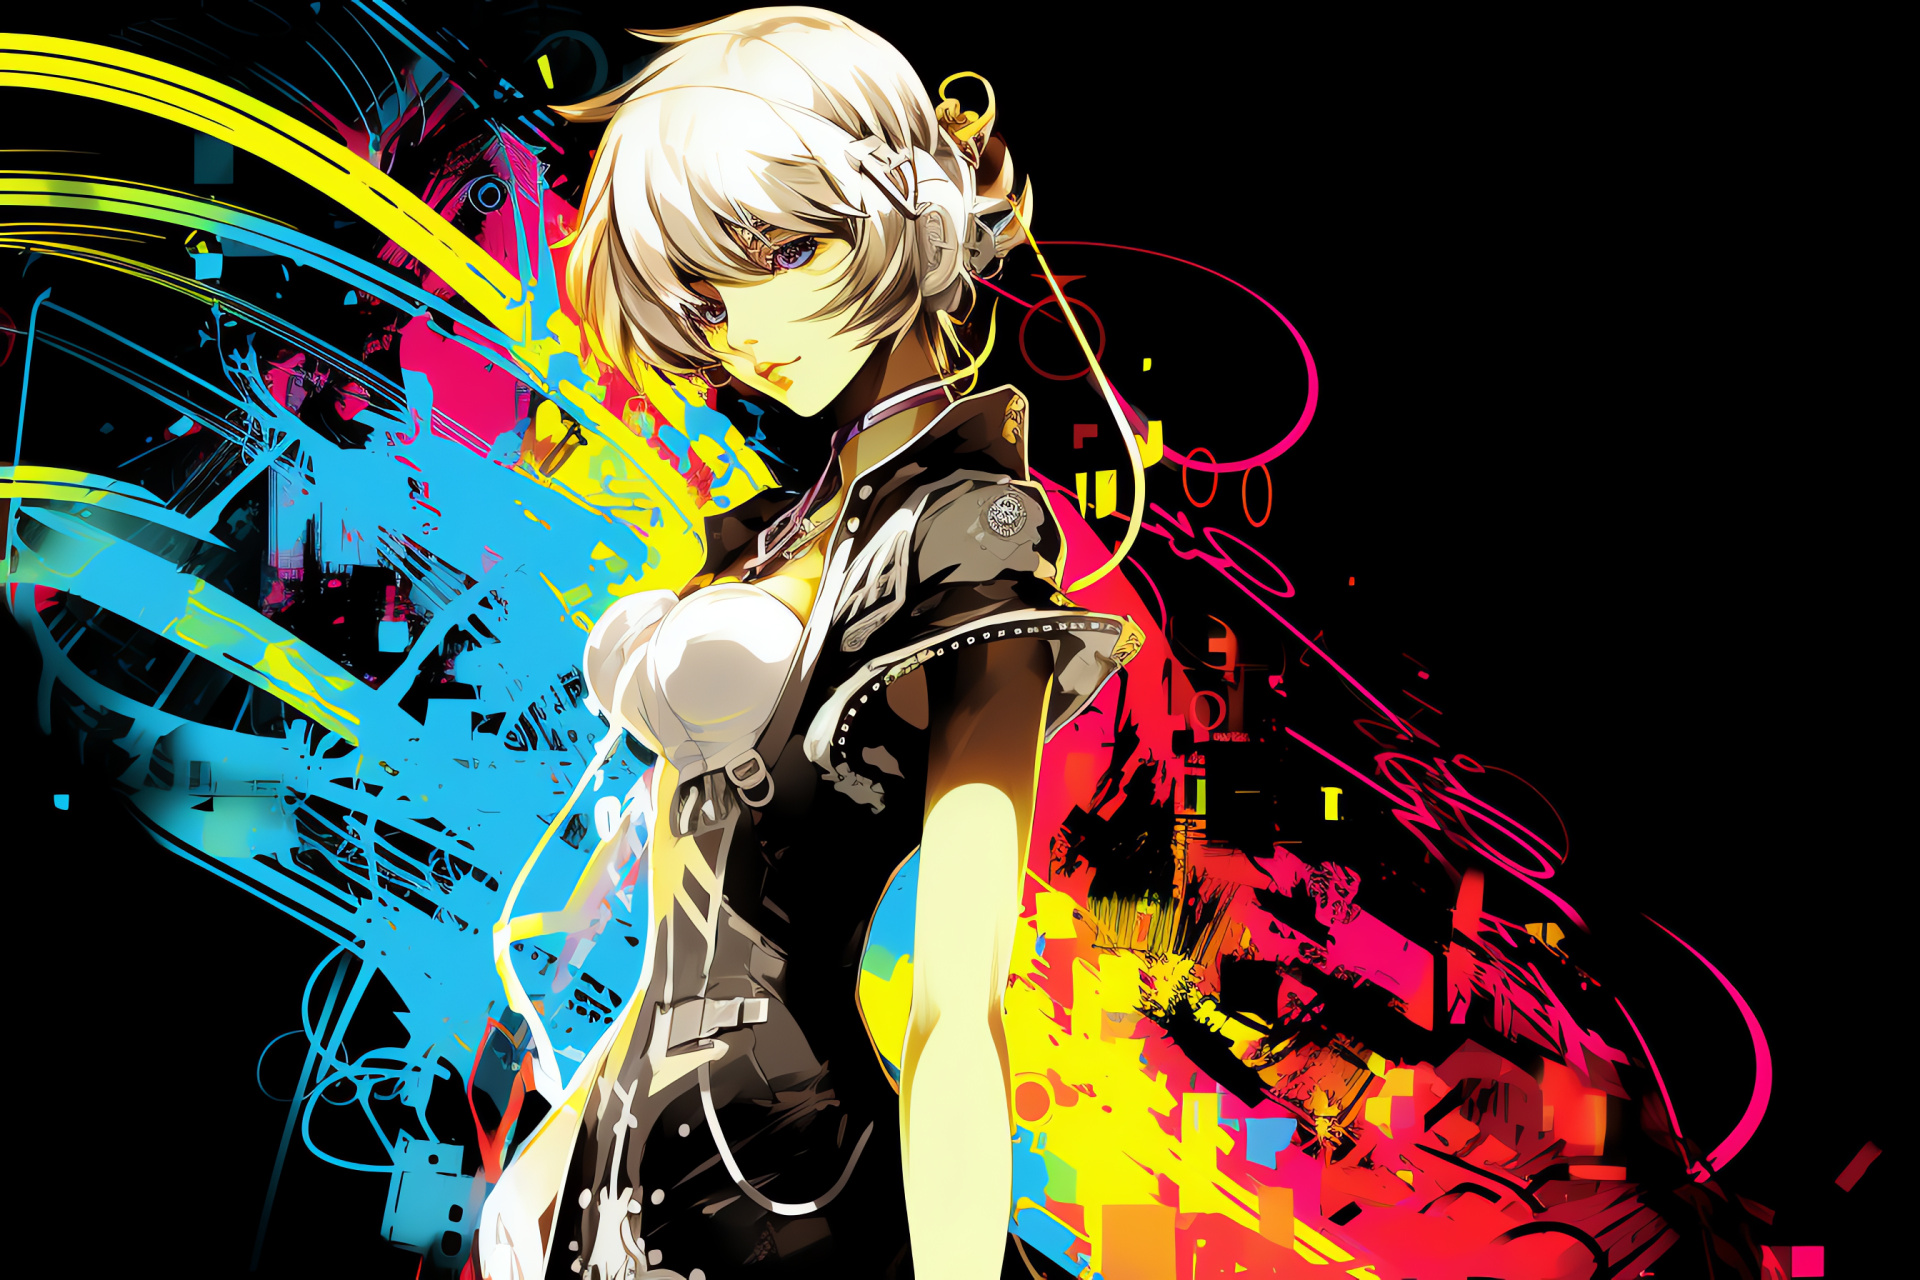 Android Aigis, Artificial persona, Teen stature, Confidence stance, Role-playing element, HD Desktop Wallpaper